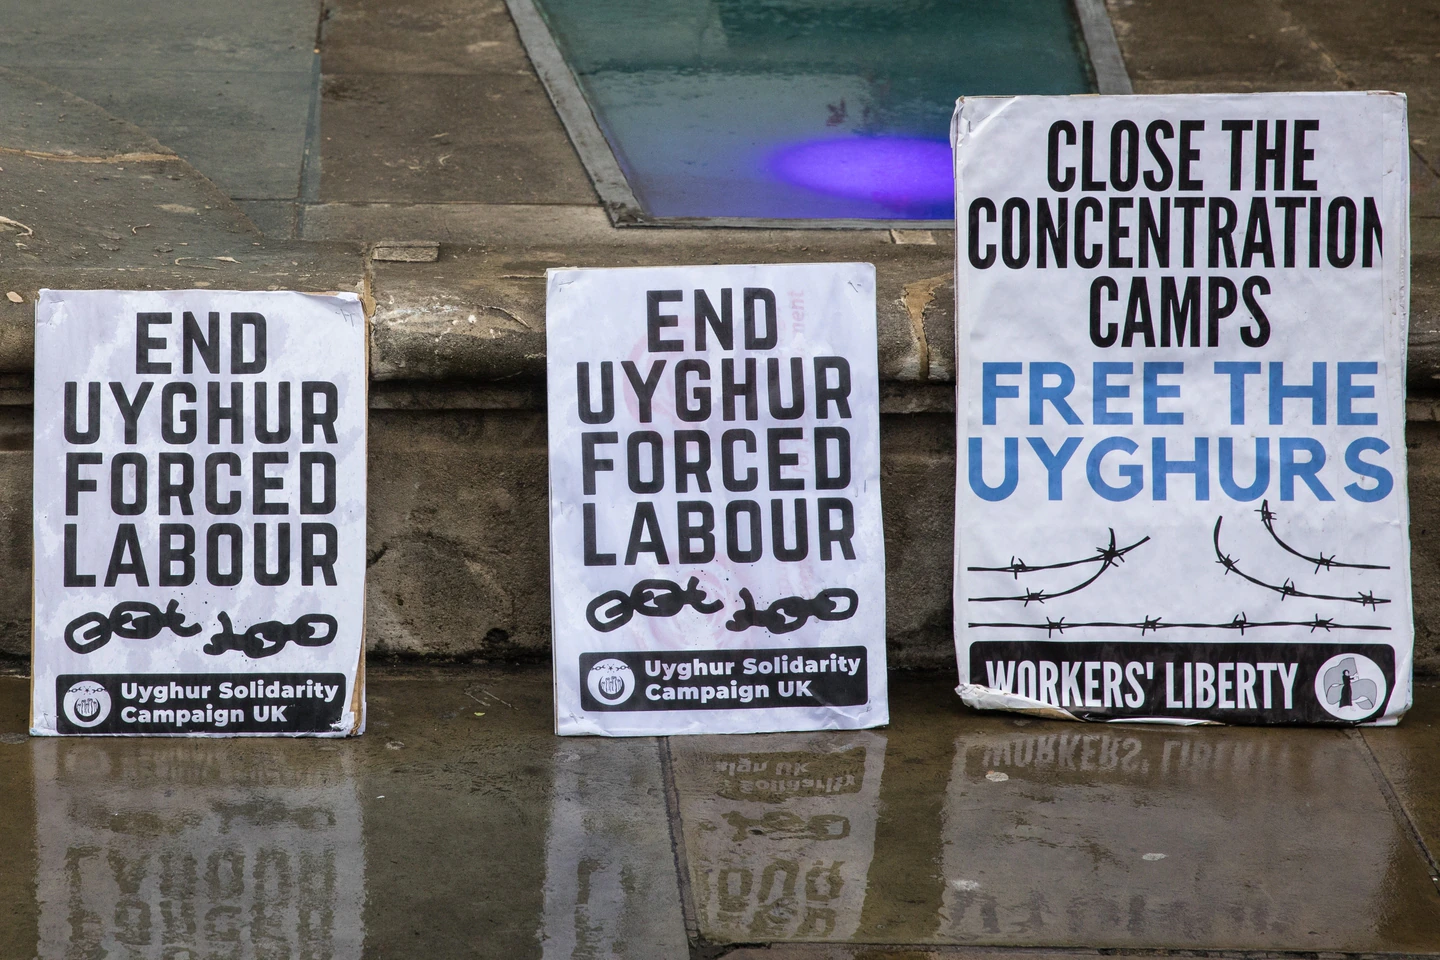 Uyghur Solidarity Campaign UK placards are pictured at a protest opposite the Chinese embassy in London on Aug. 5, 2021. (Mark Kerrison/In Pictures via Getty Images)